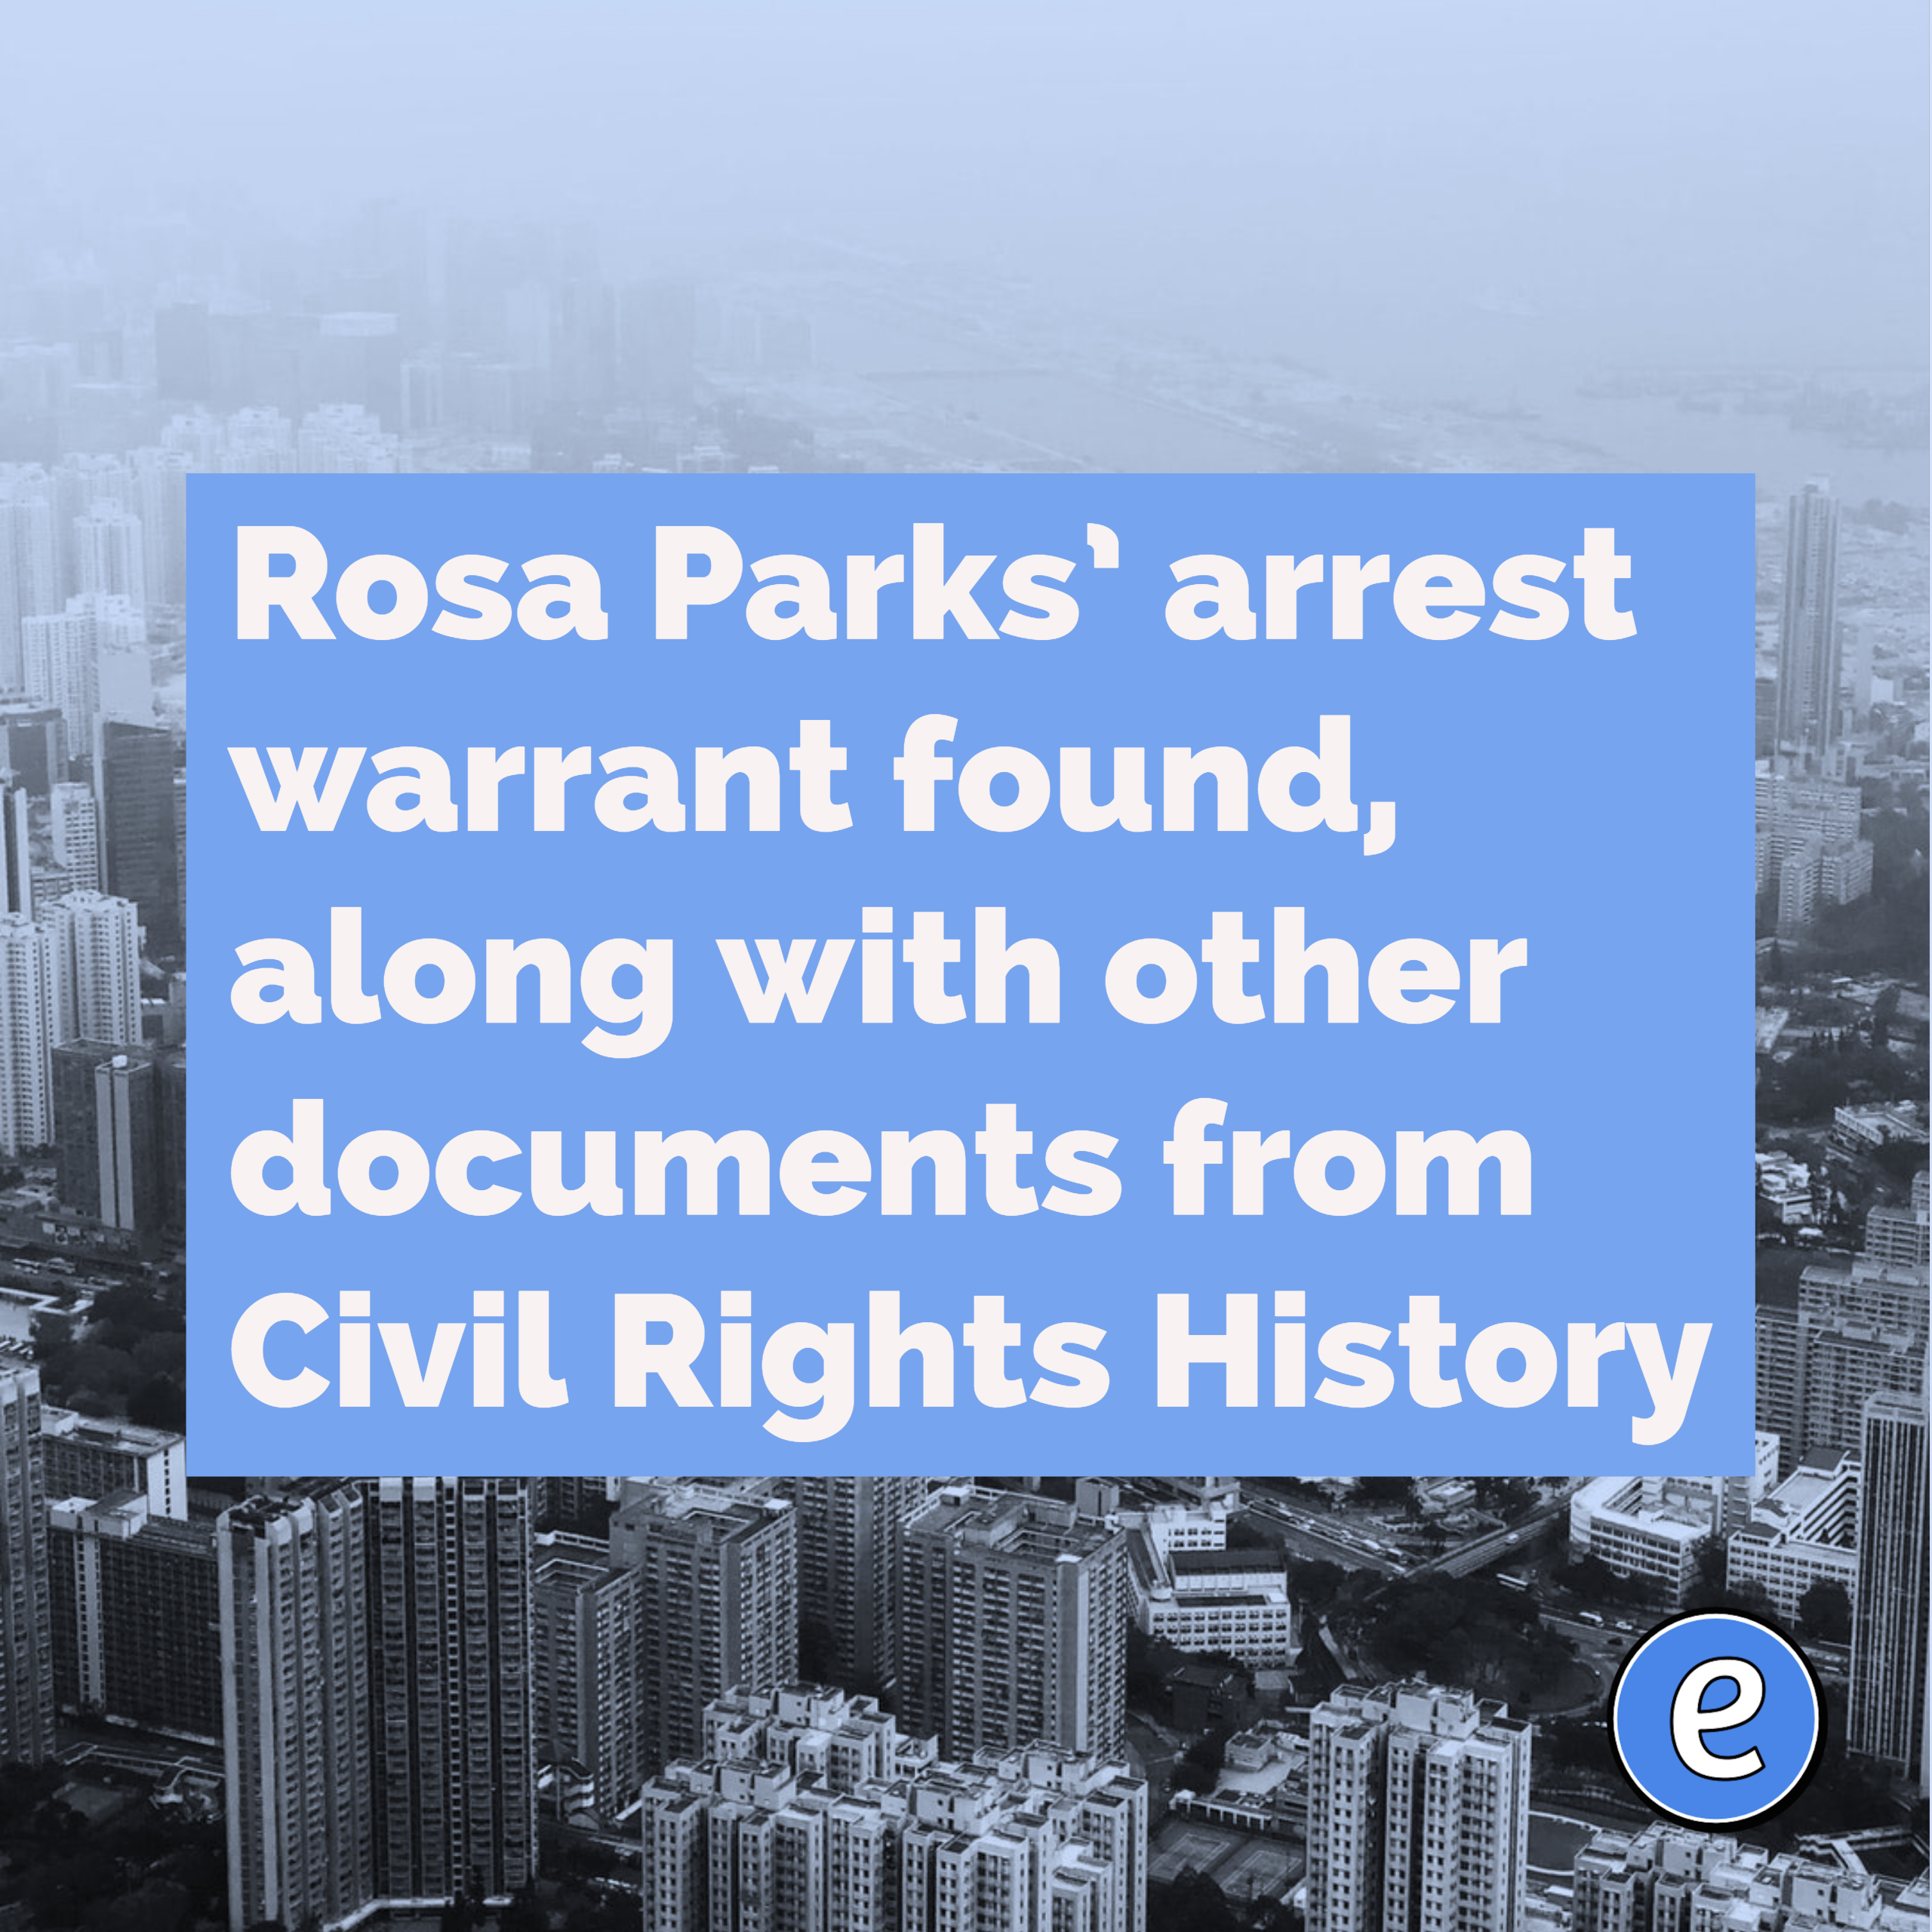 Rosa Parks’ arrest warrant found, along with other documents from Civil Rights History